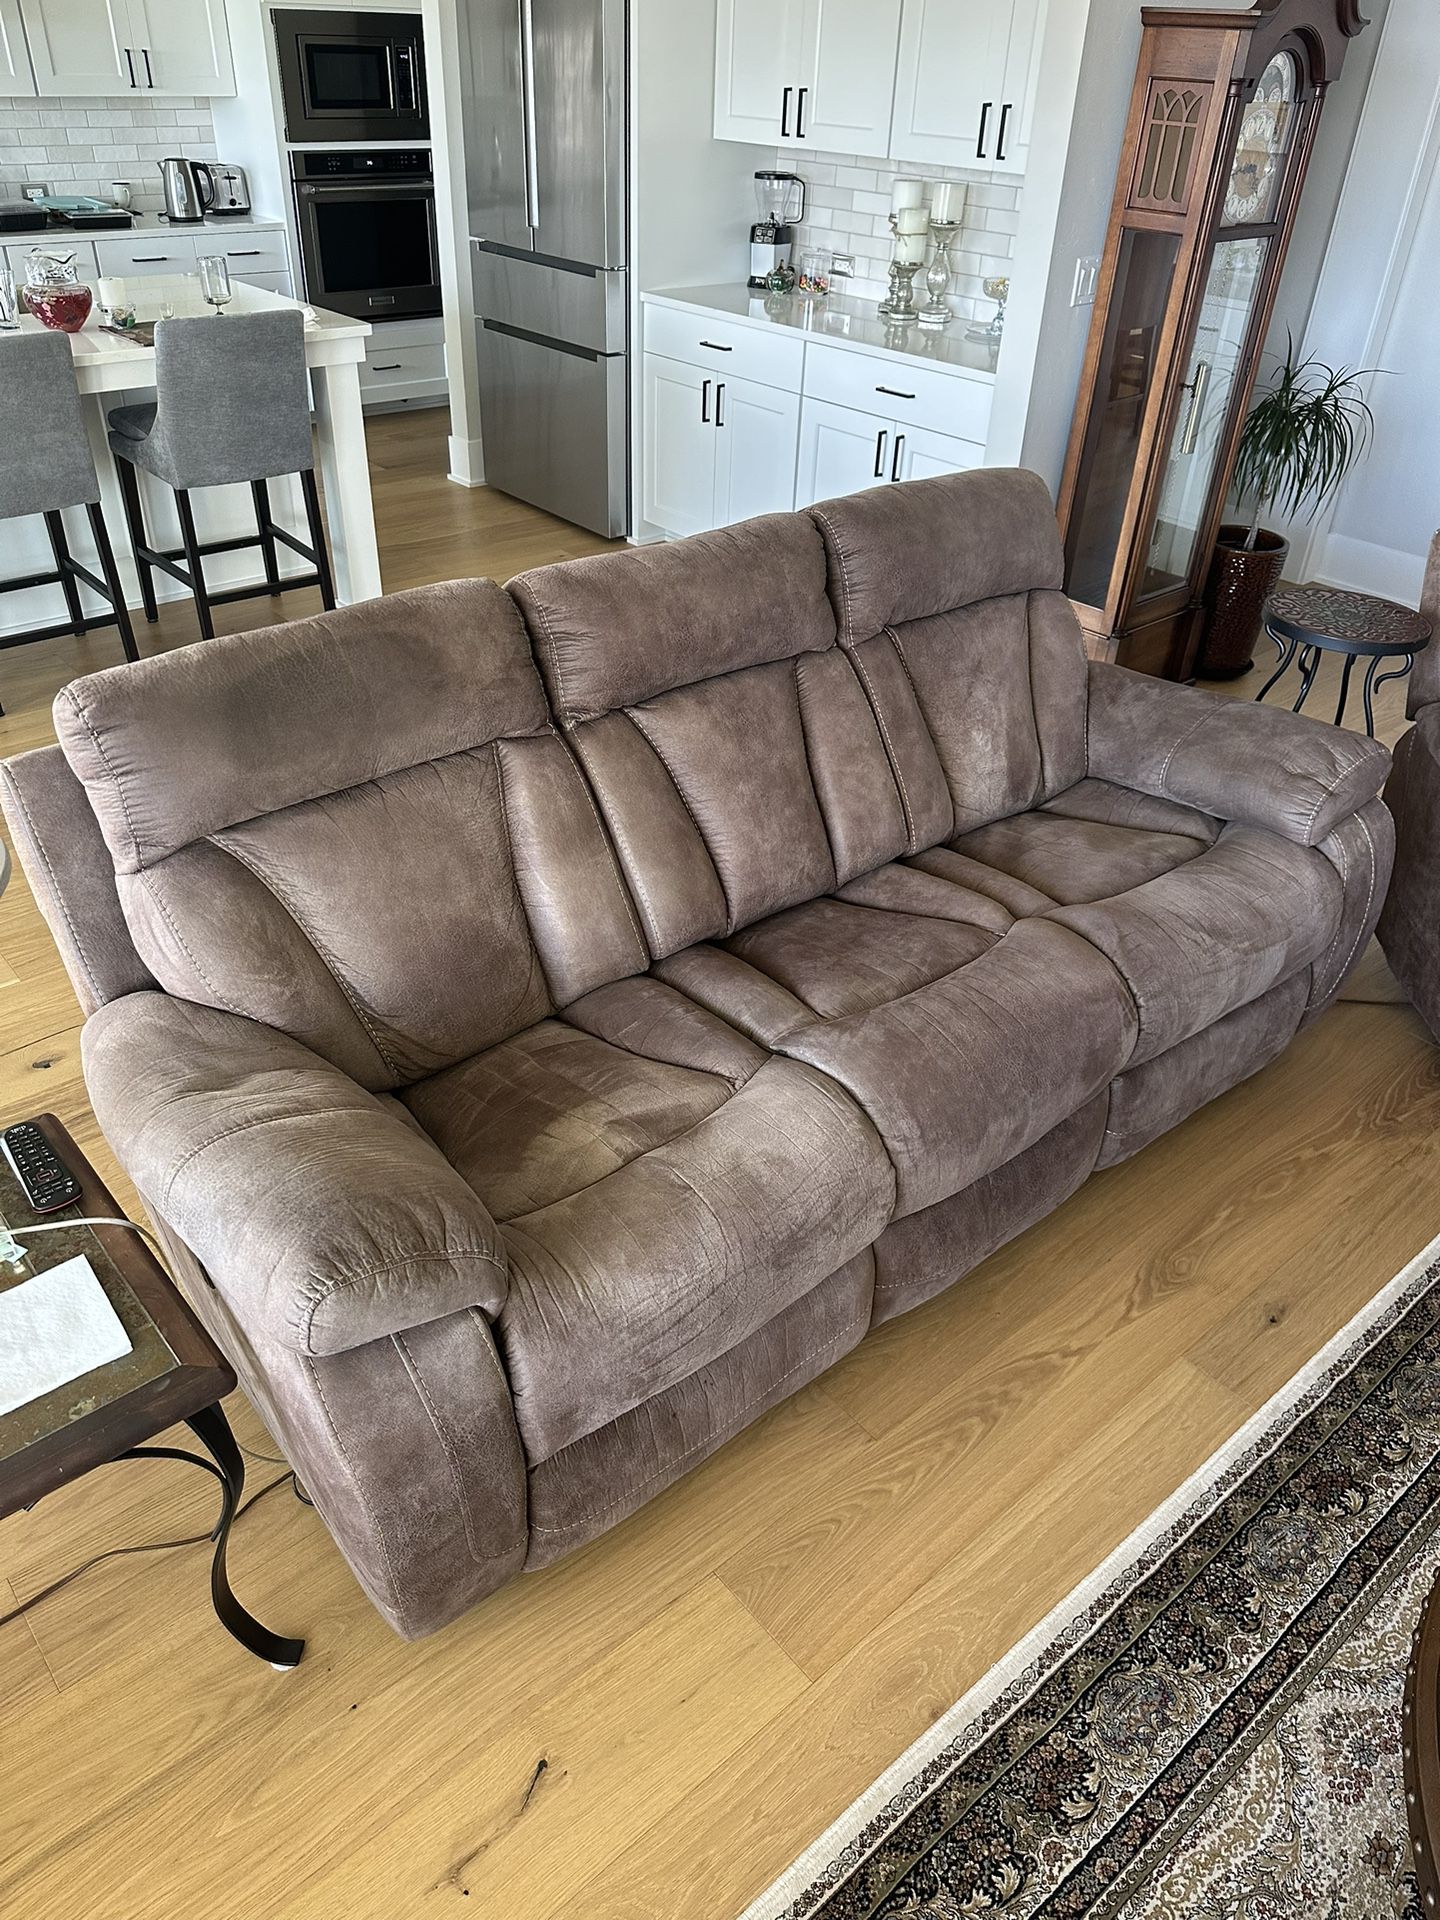 Reclining 3 Person Couch and Single Chair